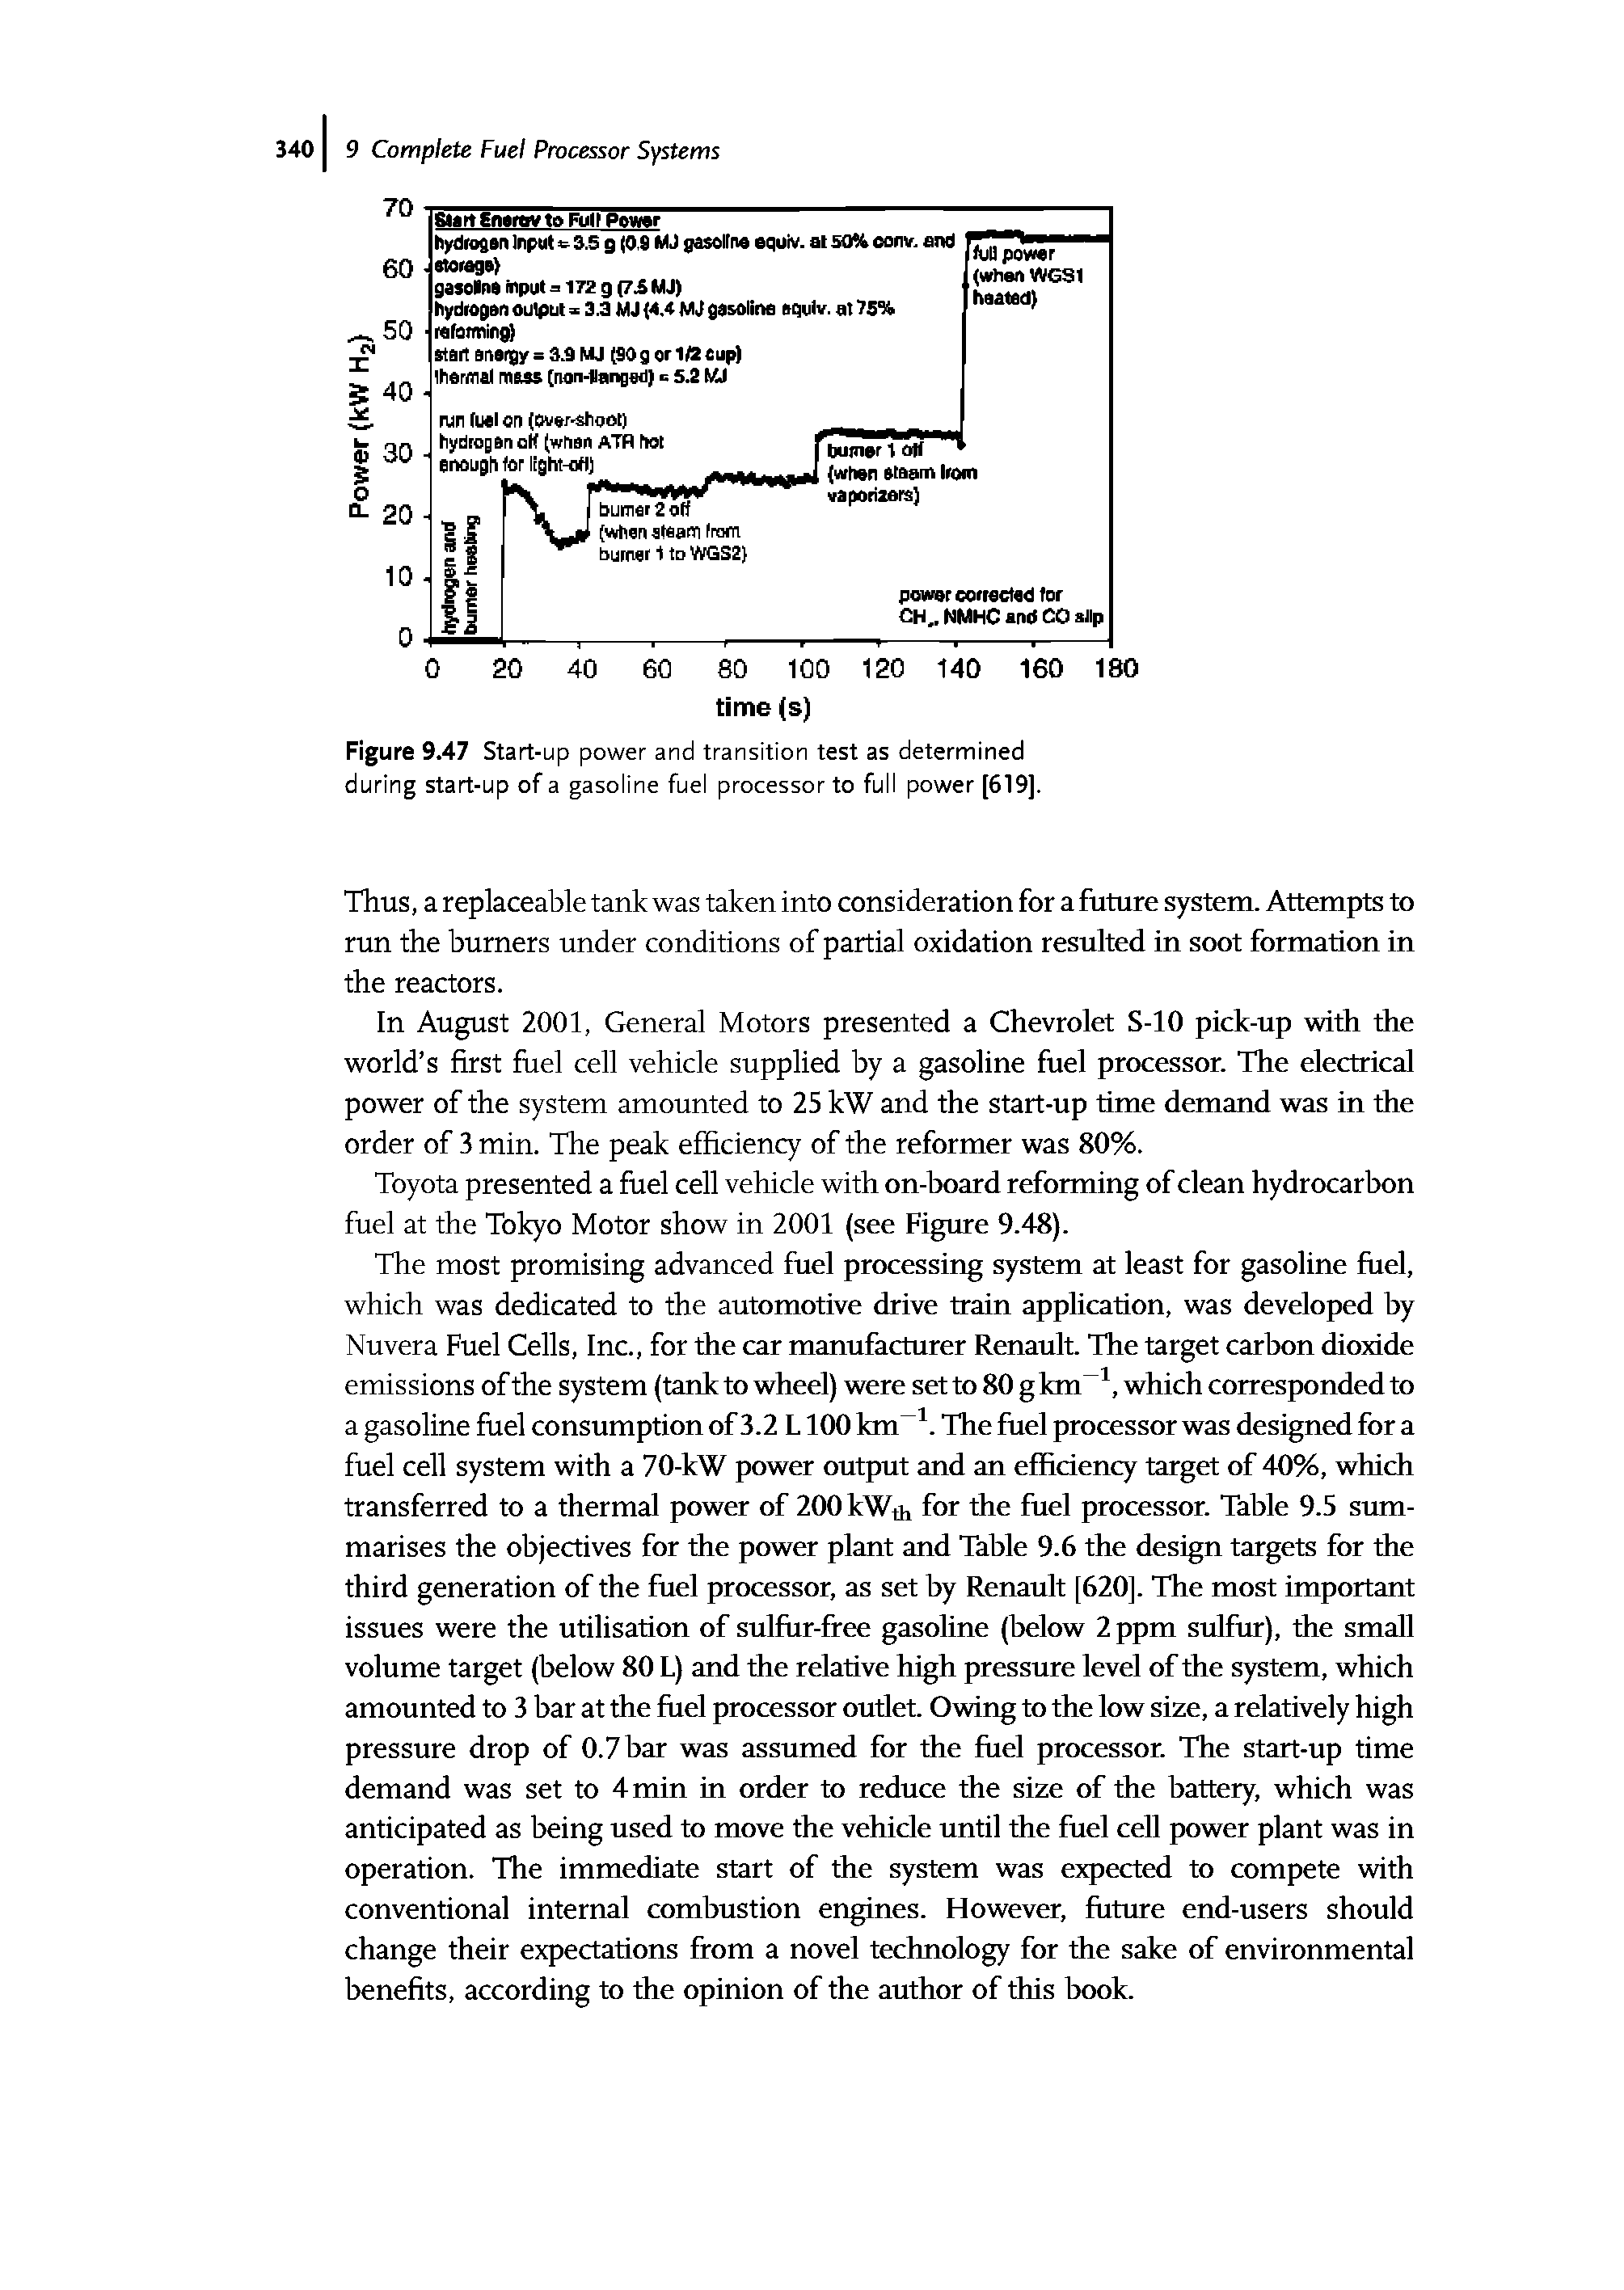 Figure 9.47 Start-up power and transition test as determined during start-up of a gasoline fuel processor to full power [619].